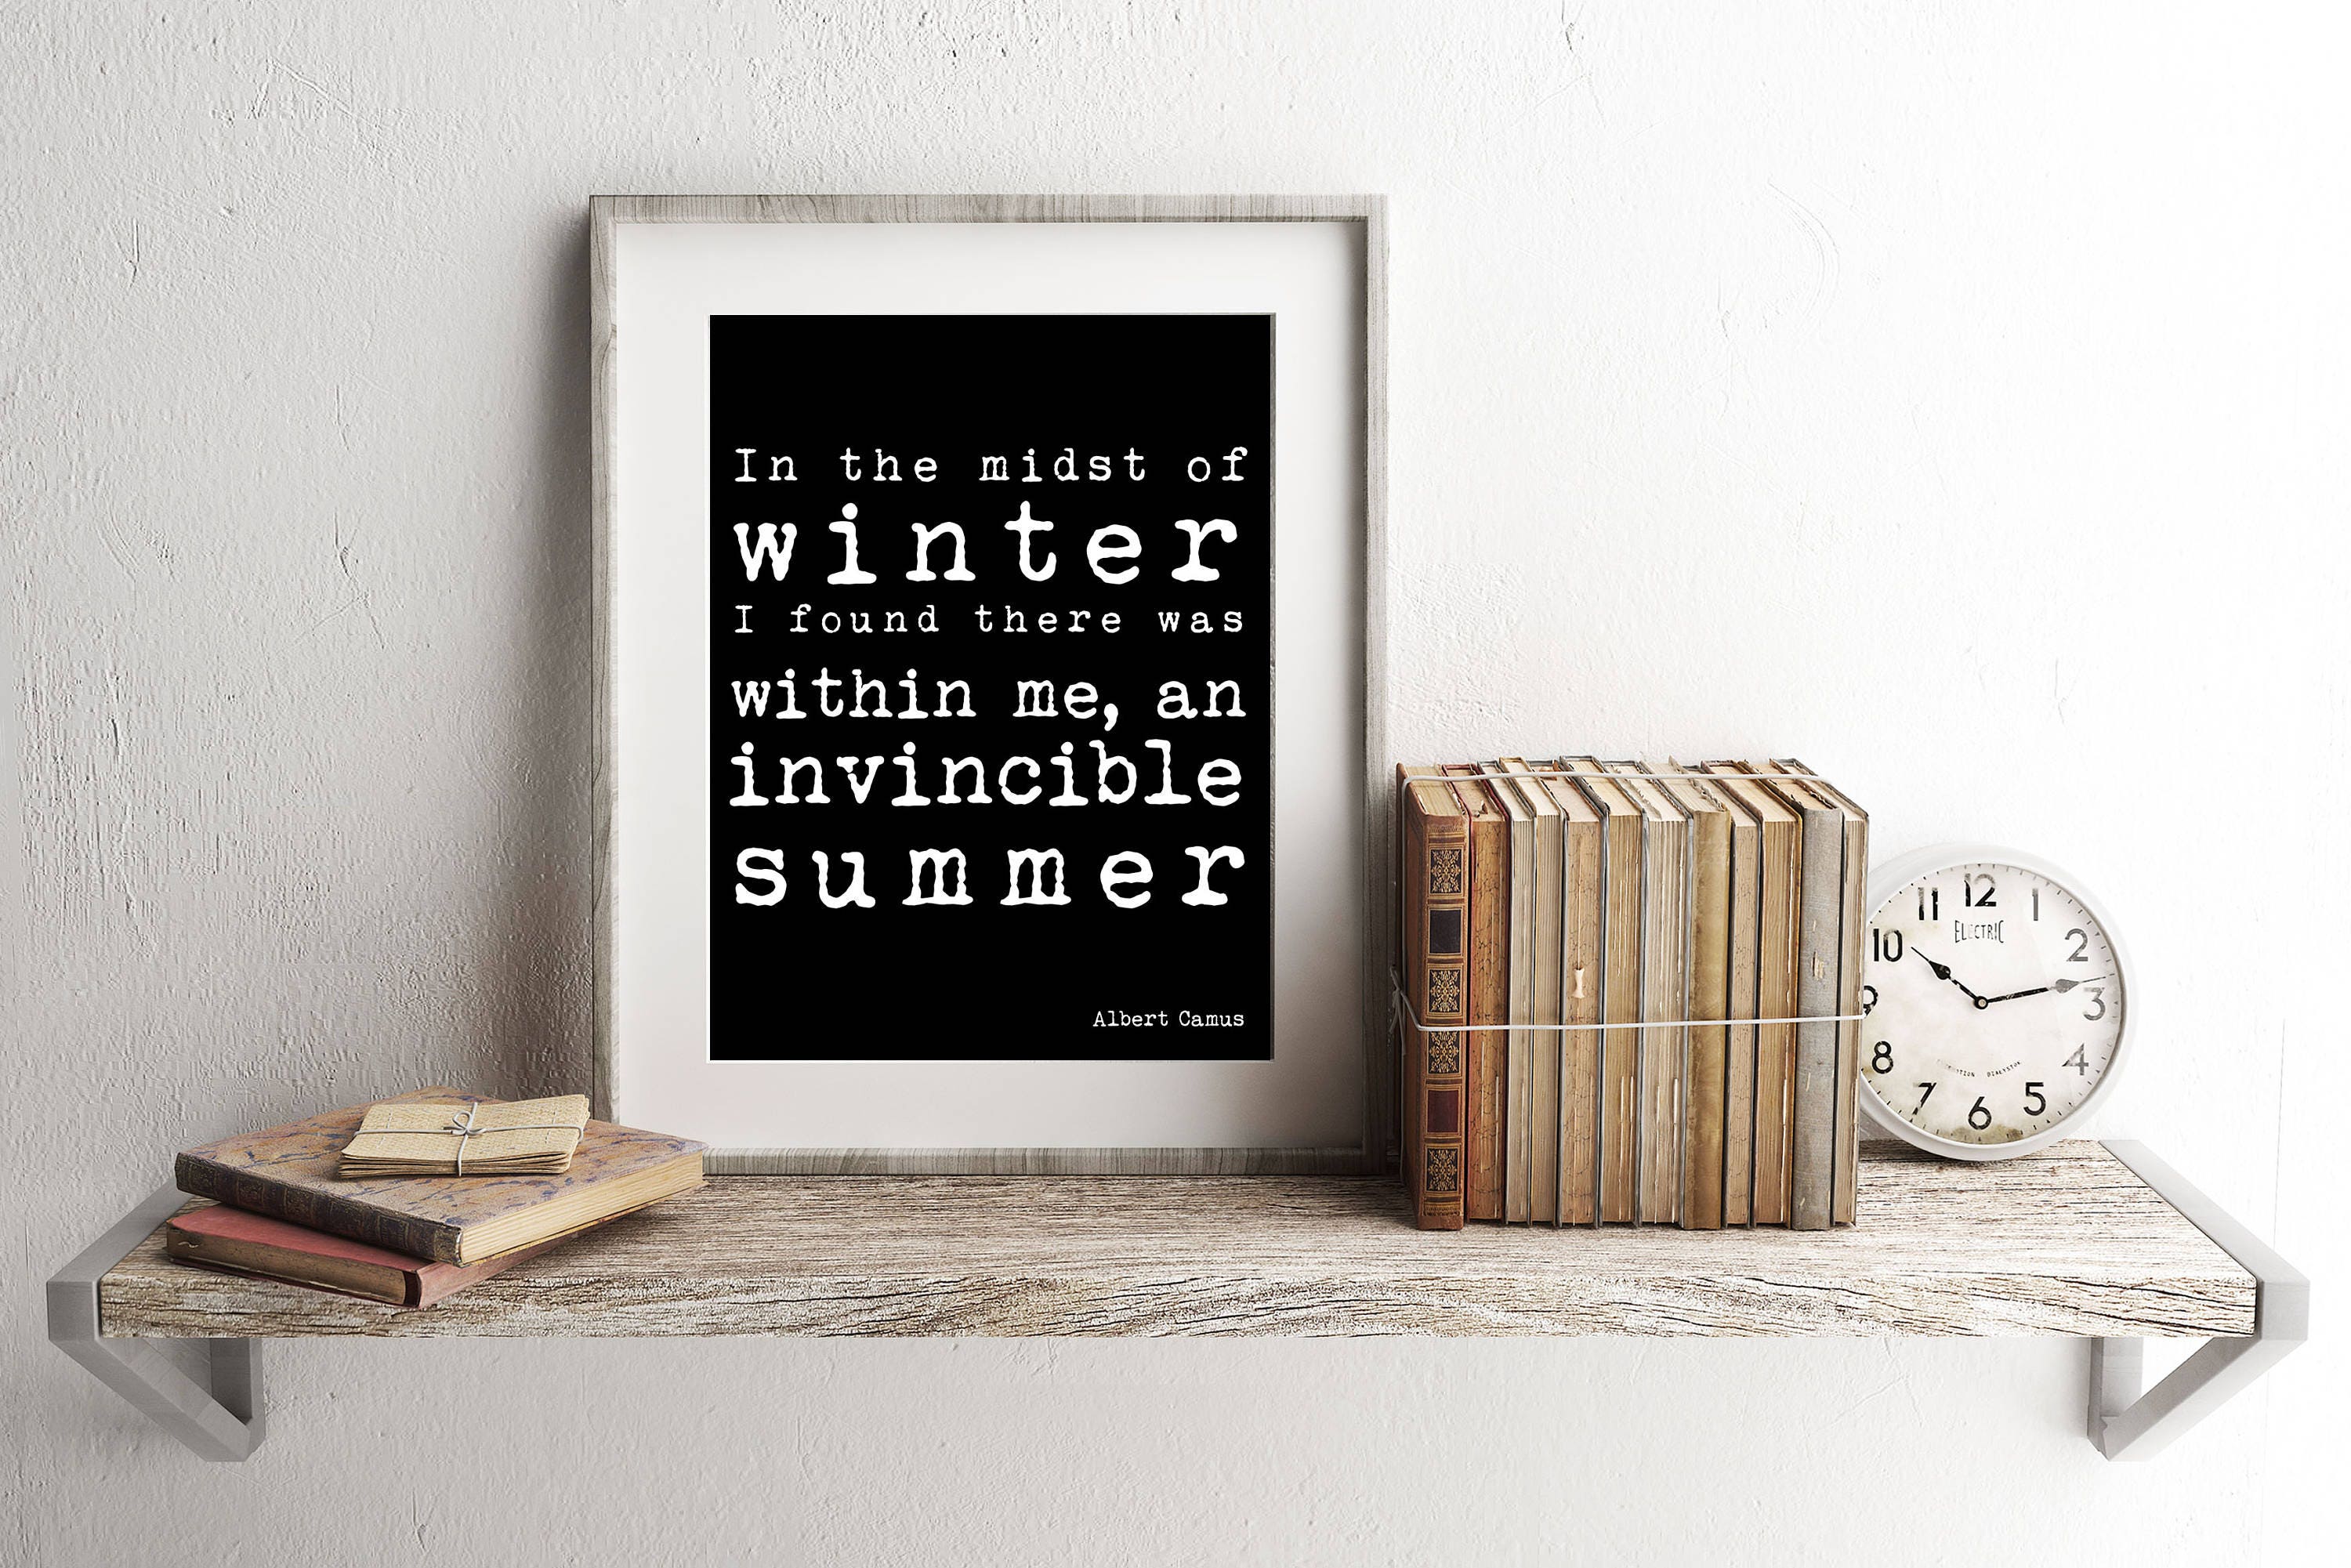 Albert Camus Quote Print, Invincible Summer Wall Art Print, Inspirational Black And White Home Decor